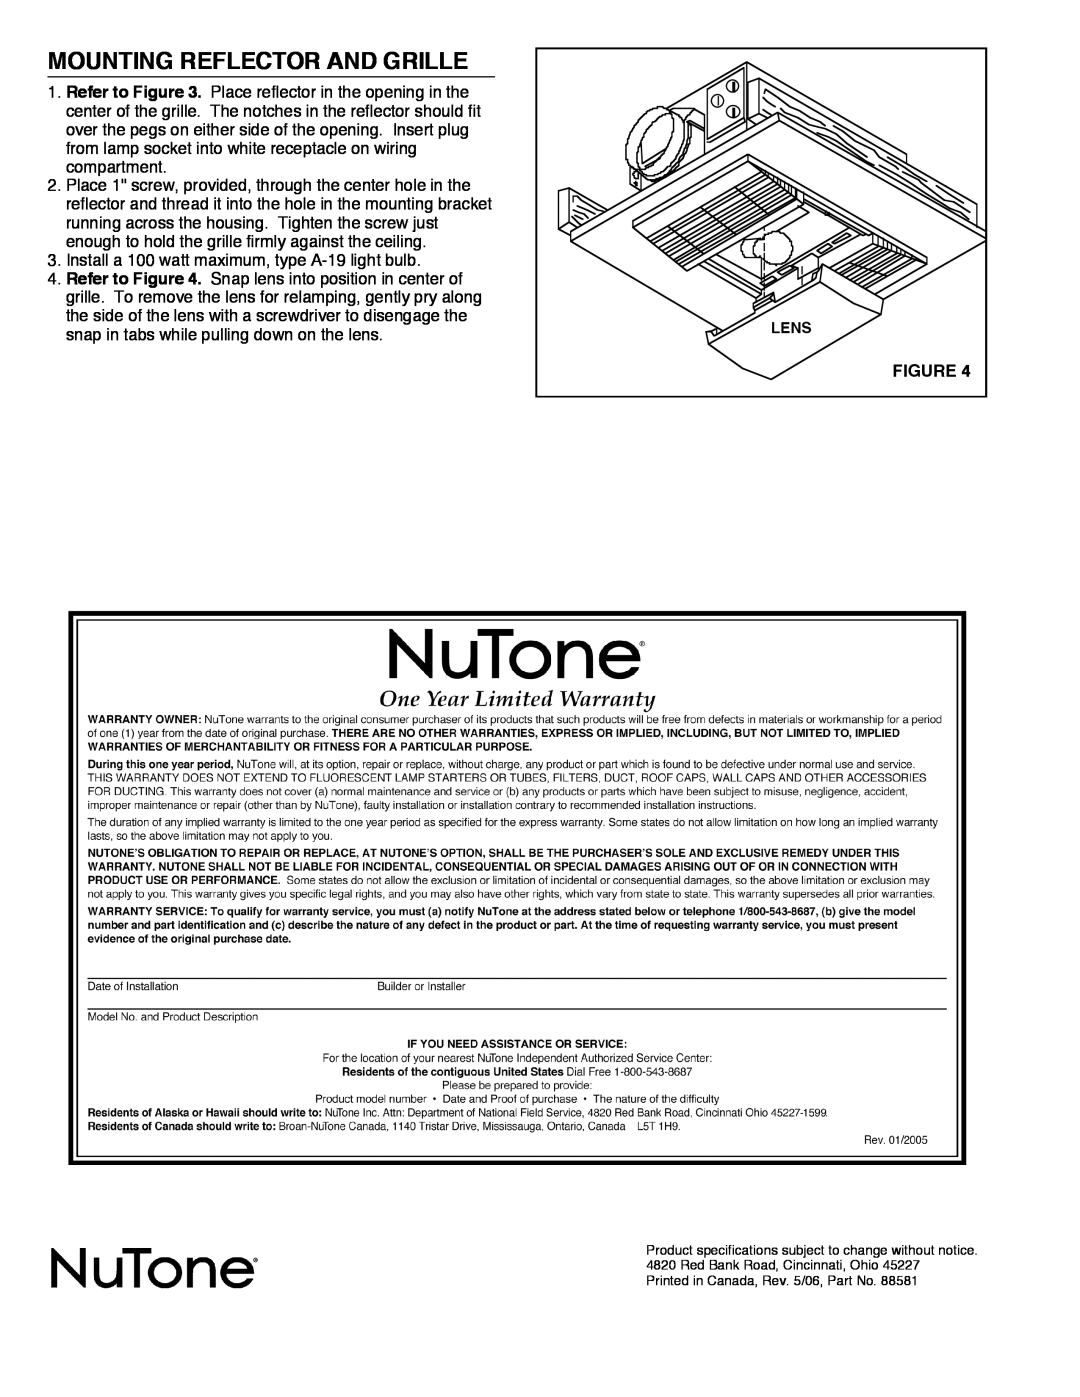 NuTone 668RP installation instructions Mounting Reflector And Grille 